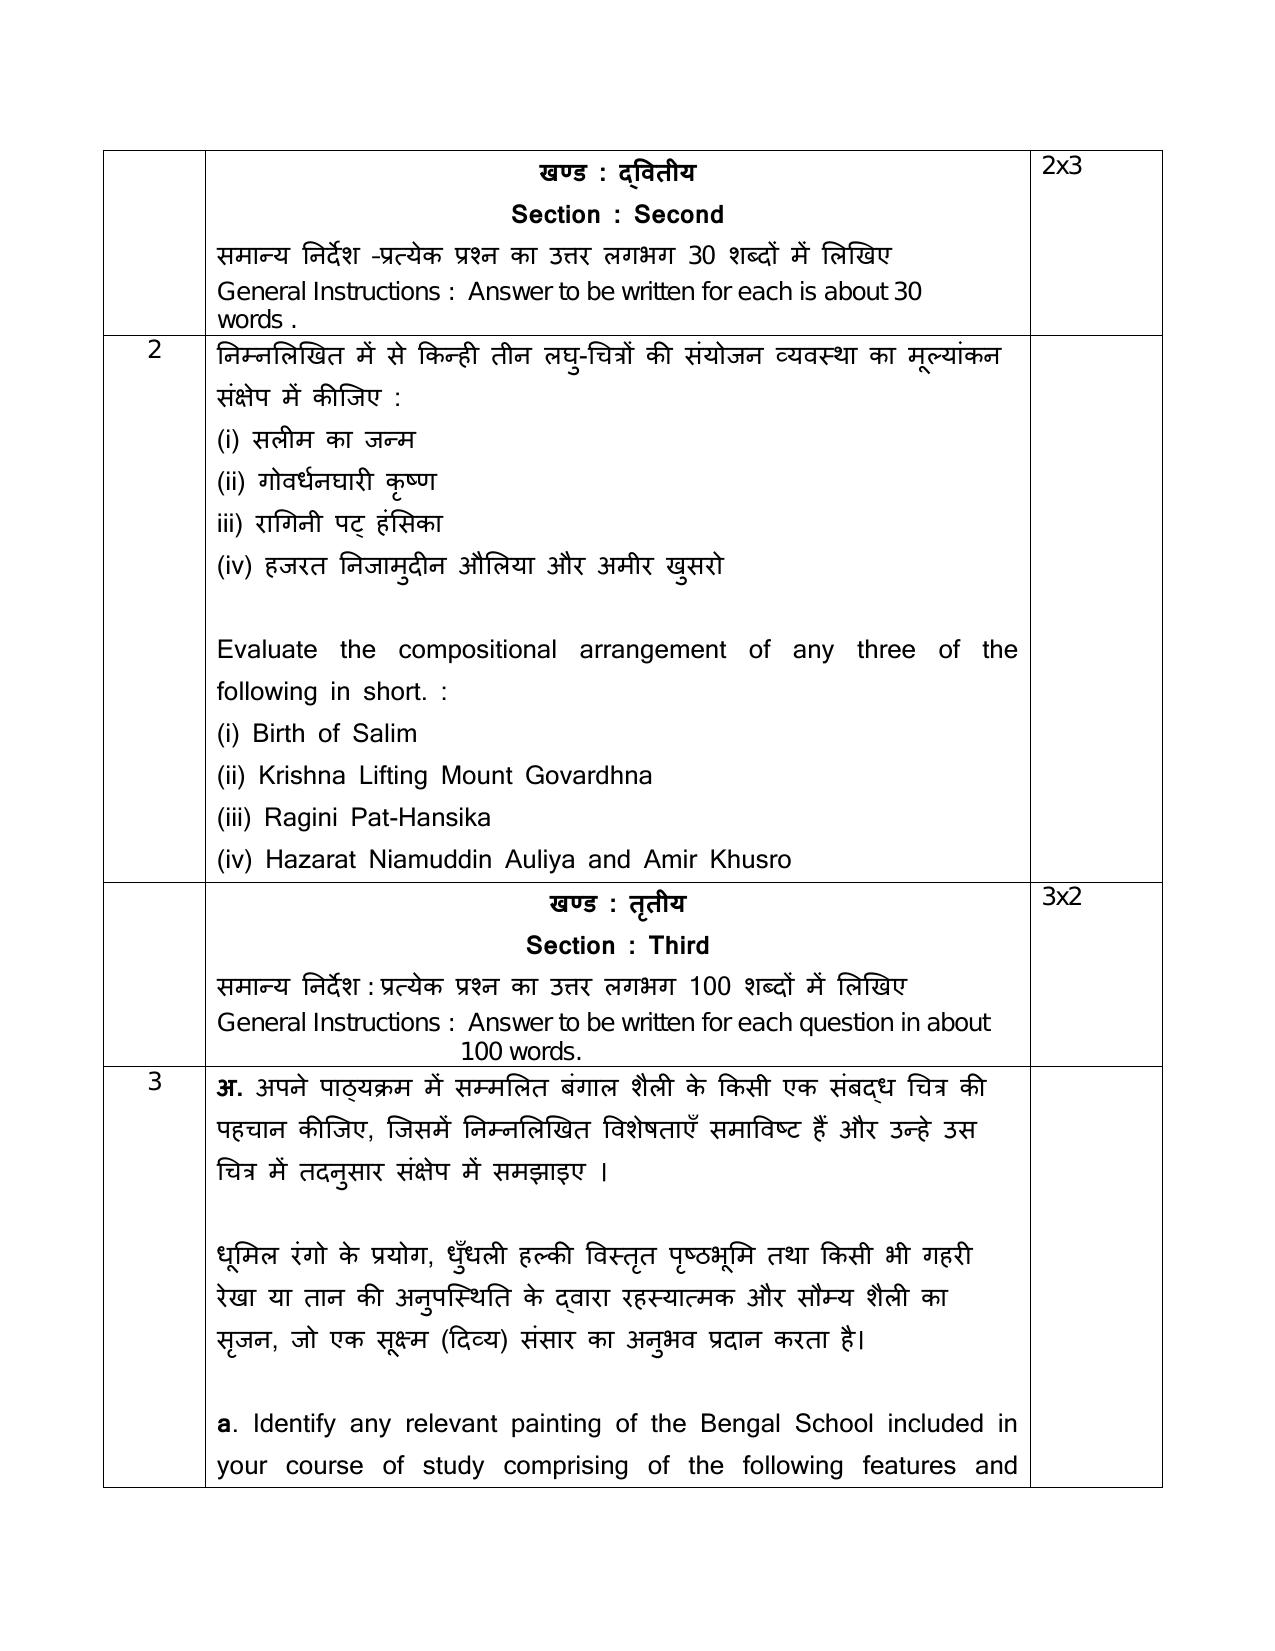 CBSE Class 12 Painting -Sample Paper 2019-20 - Page 4